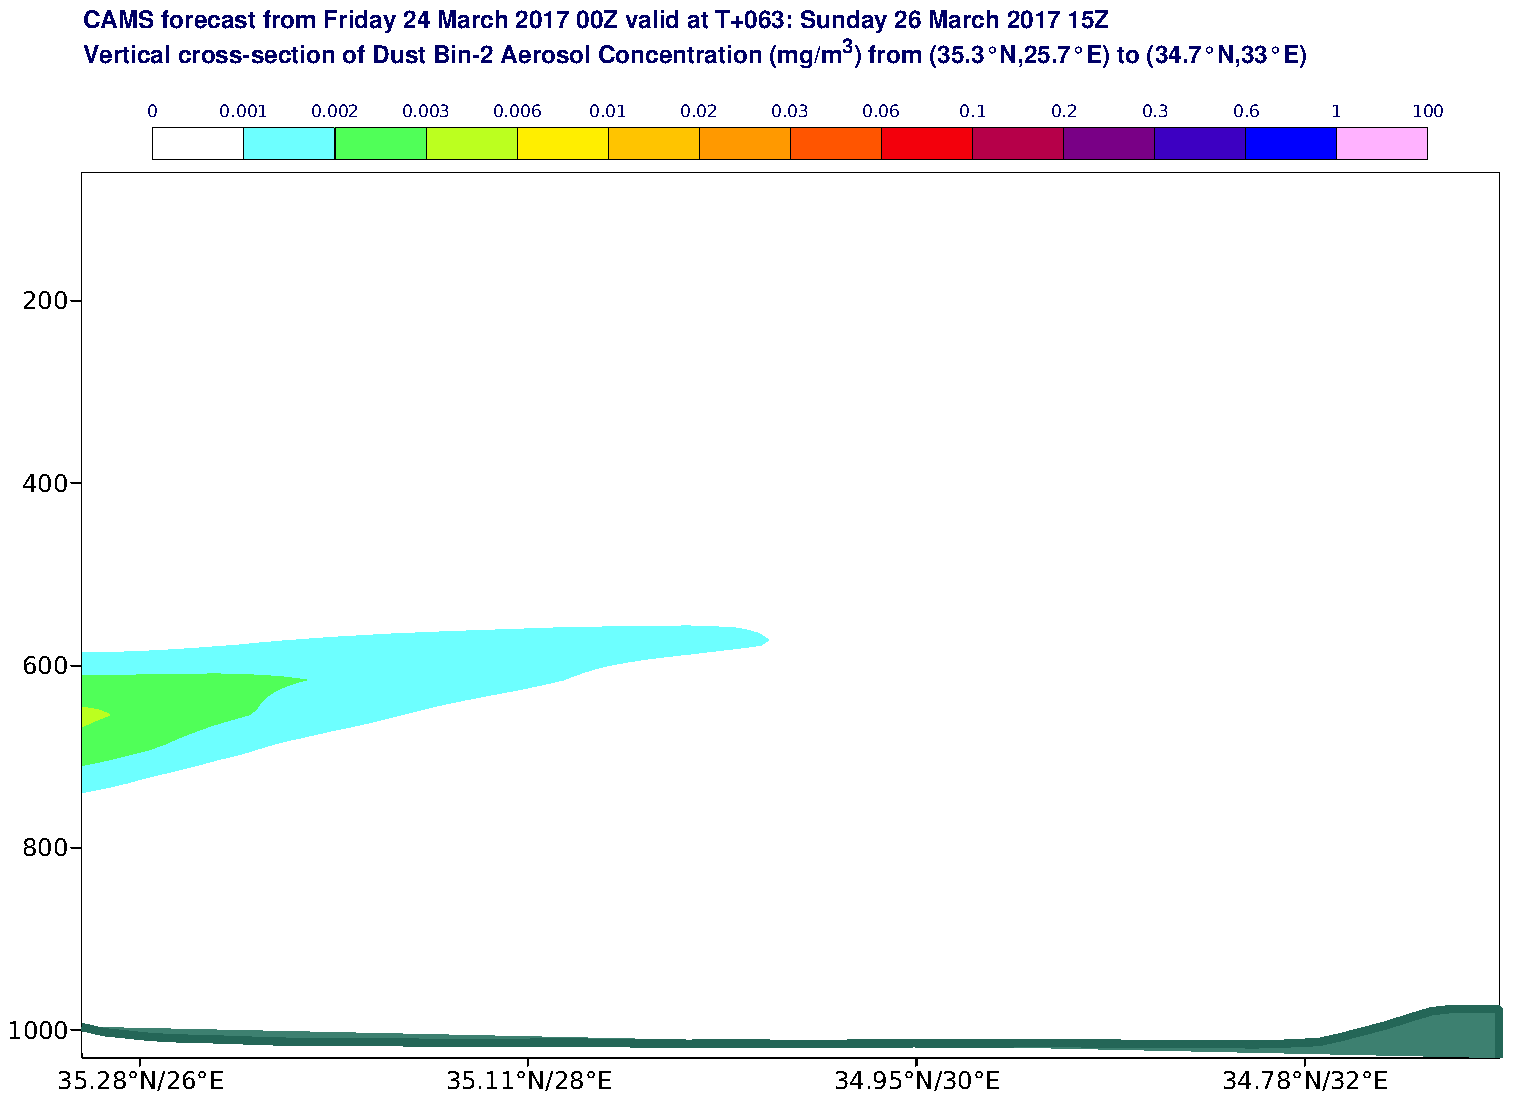 Vertical cross-section of Dust Bin-2 Aerosol Concentration (mg/m3) valid at T63 - 2017-03-26 15:00